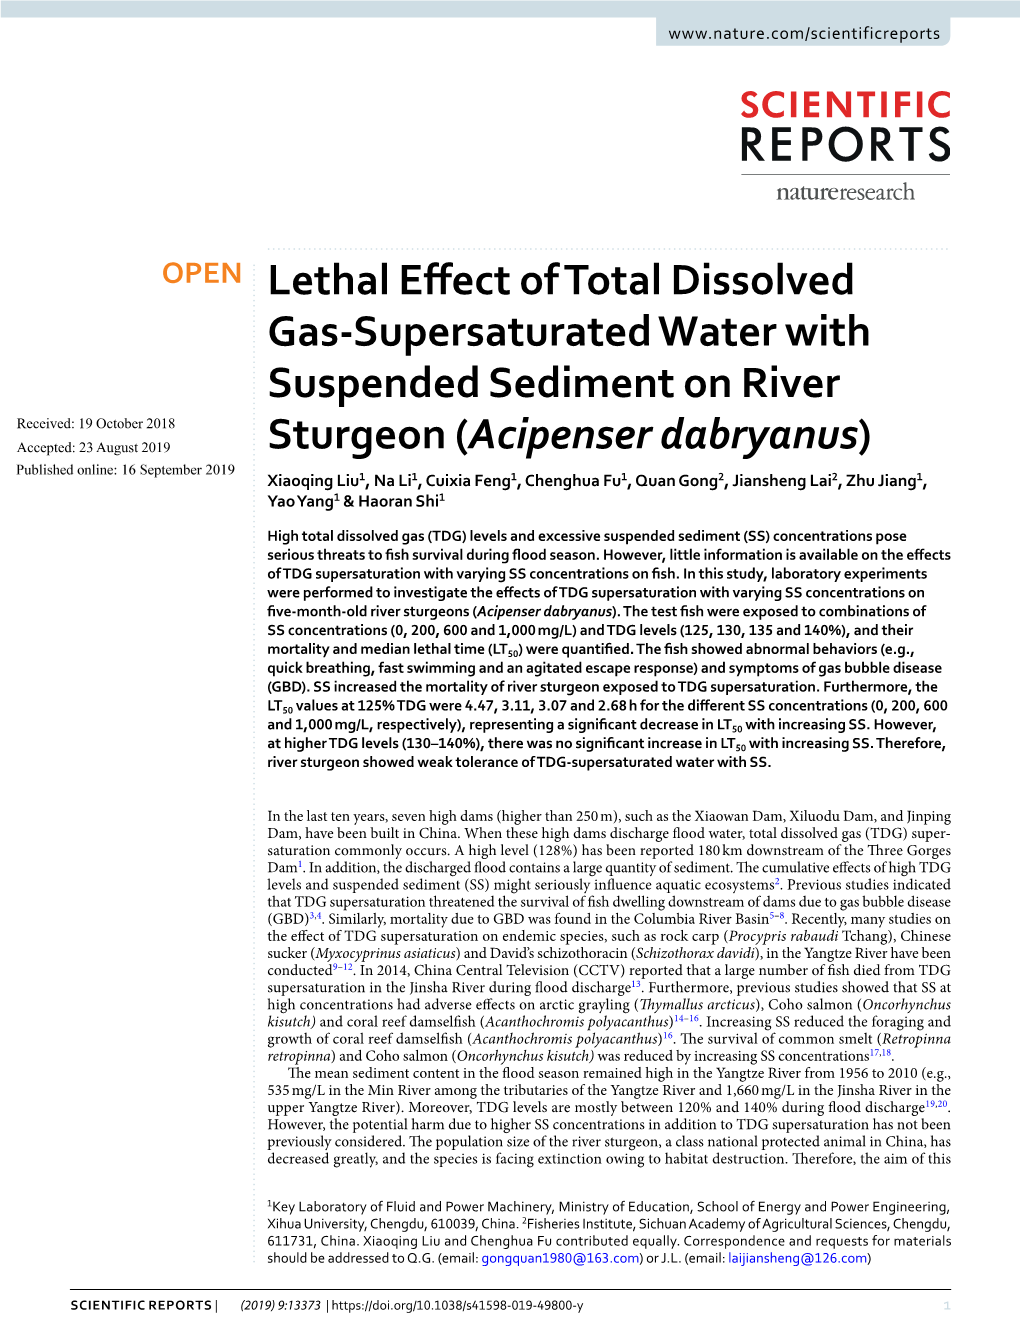 Lethal Effect of Total Dissolved Gas-Supersaturated Water With